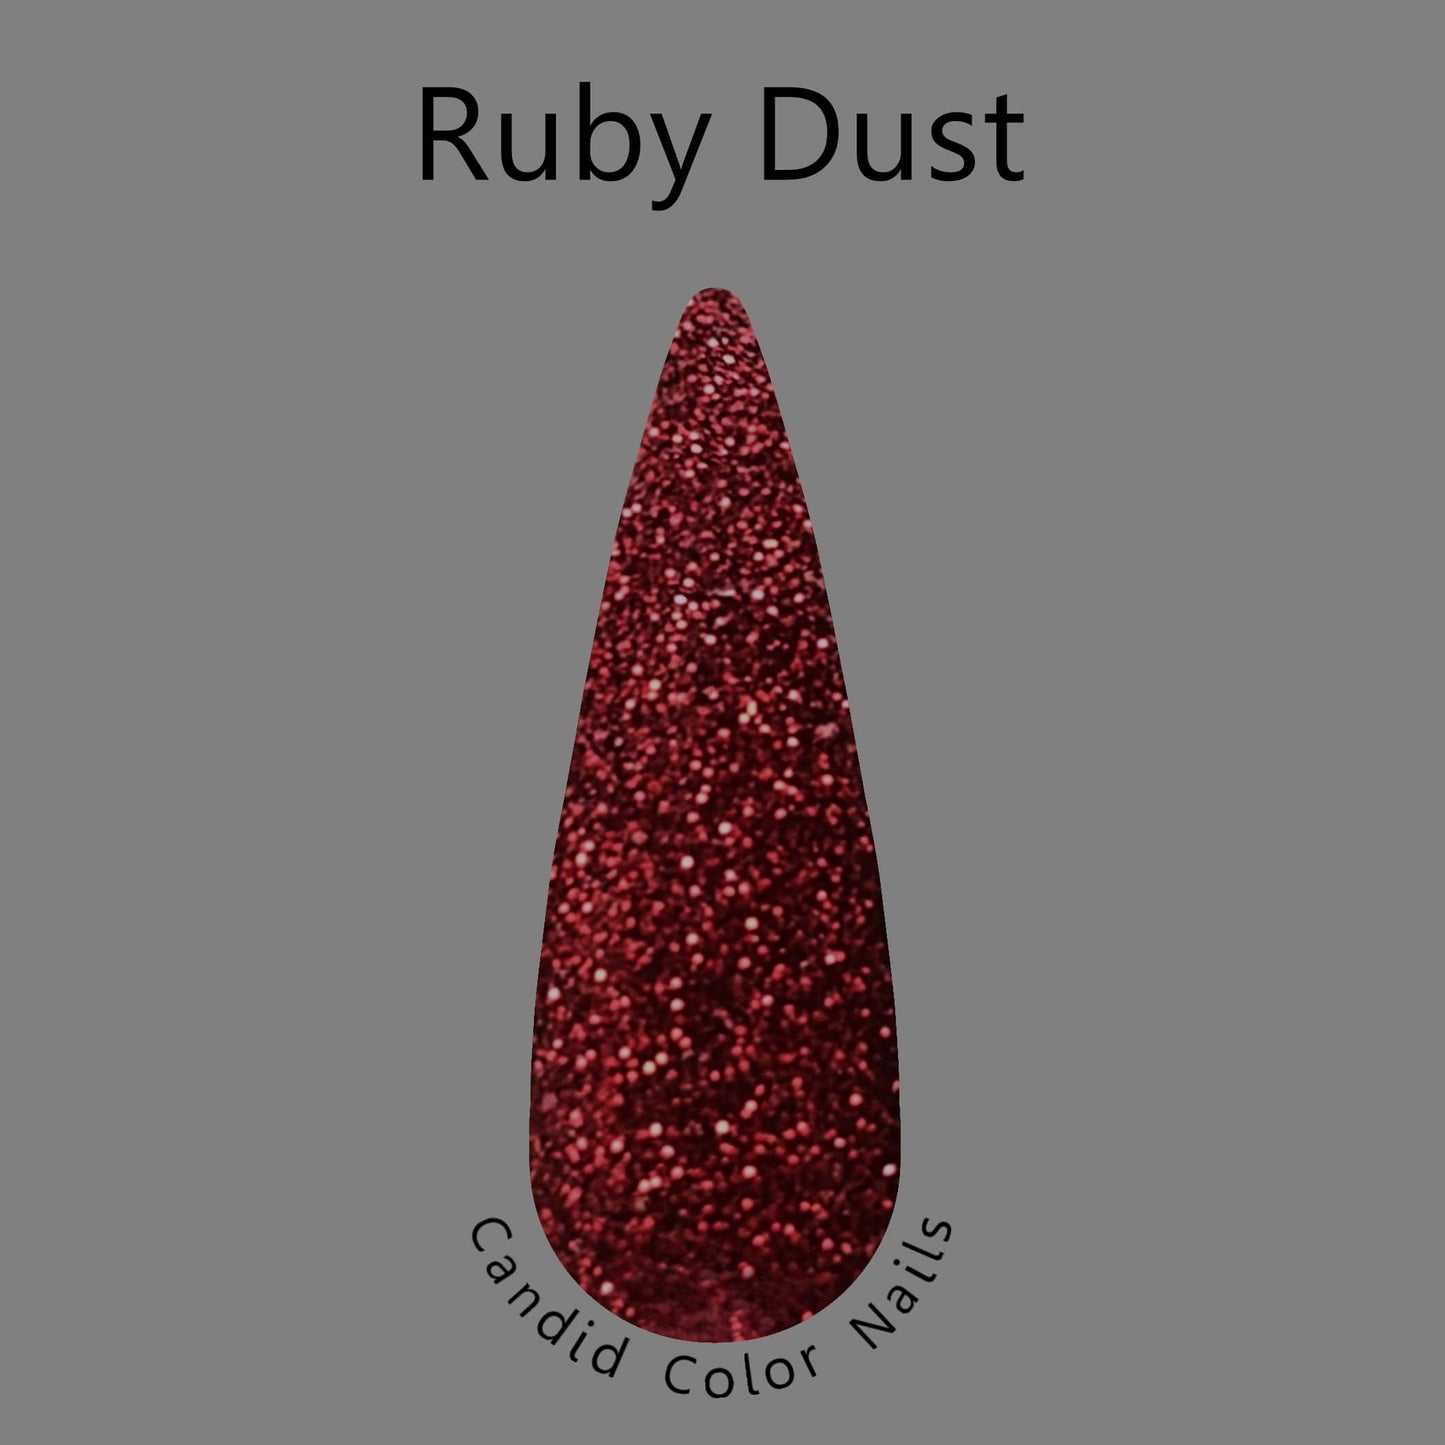 A finger nail swatch with a dark red extra fine metallic / reflective glitter in a clear dip powder base.